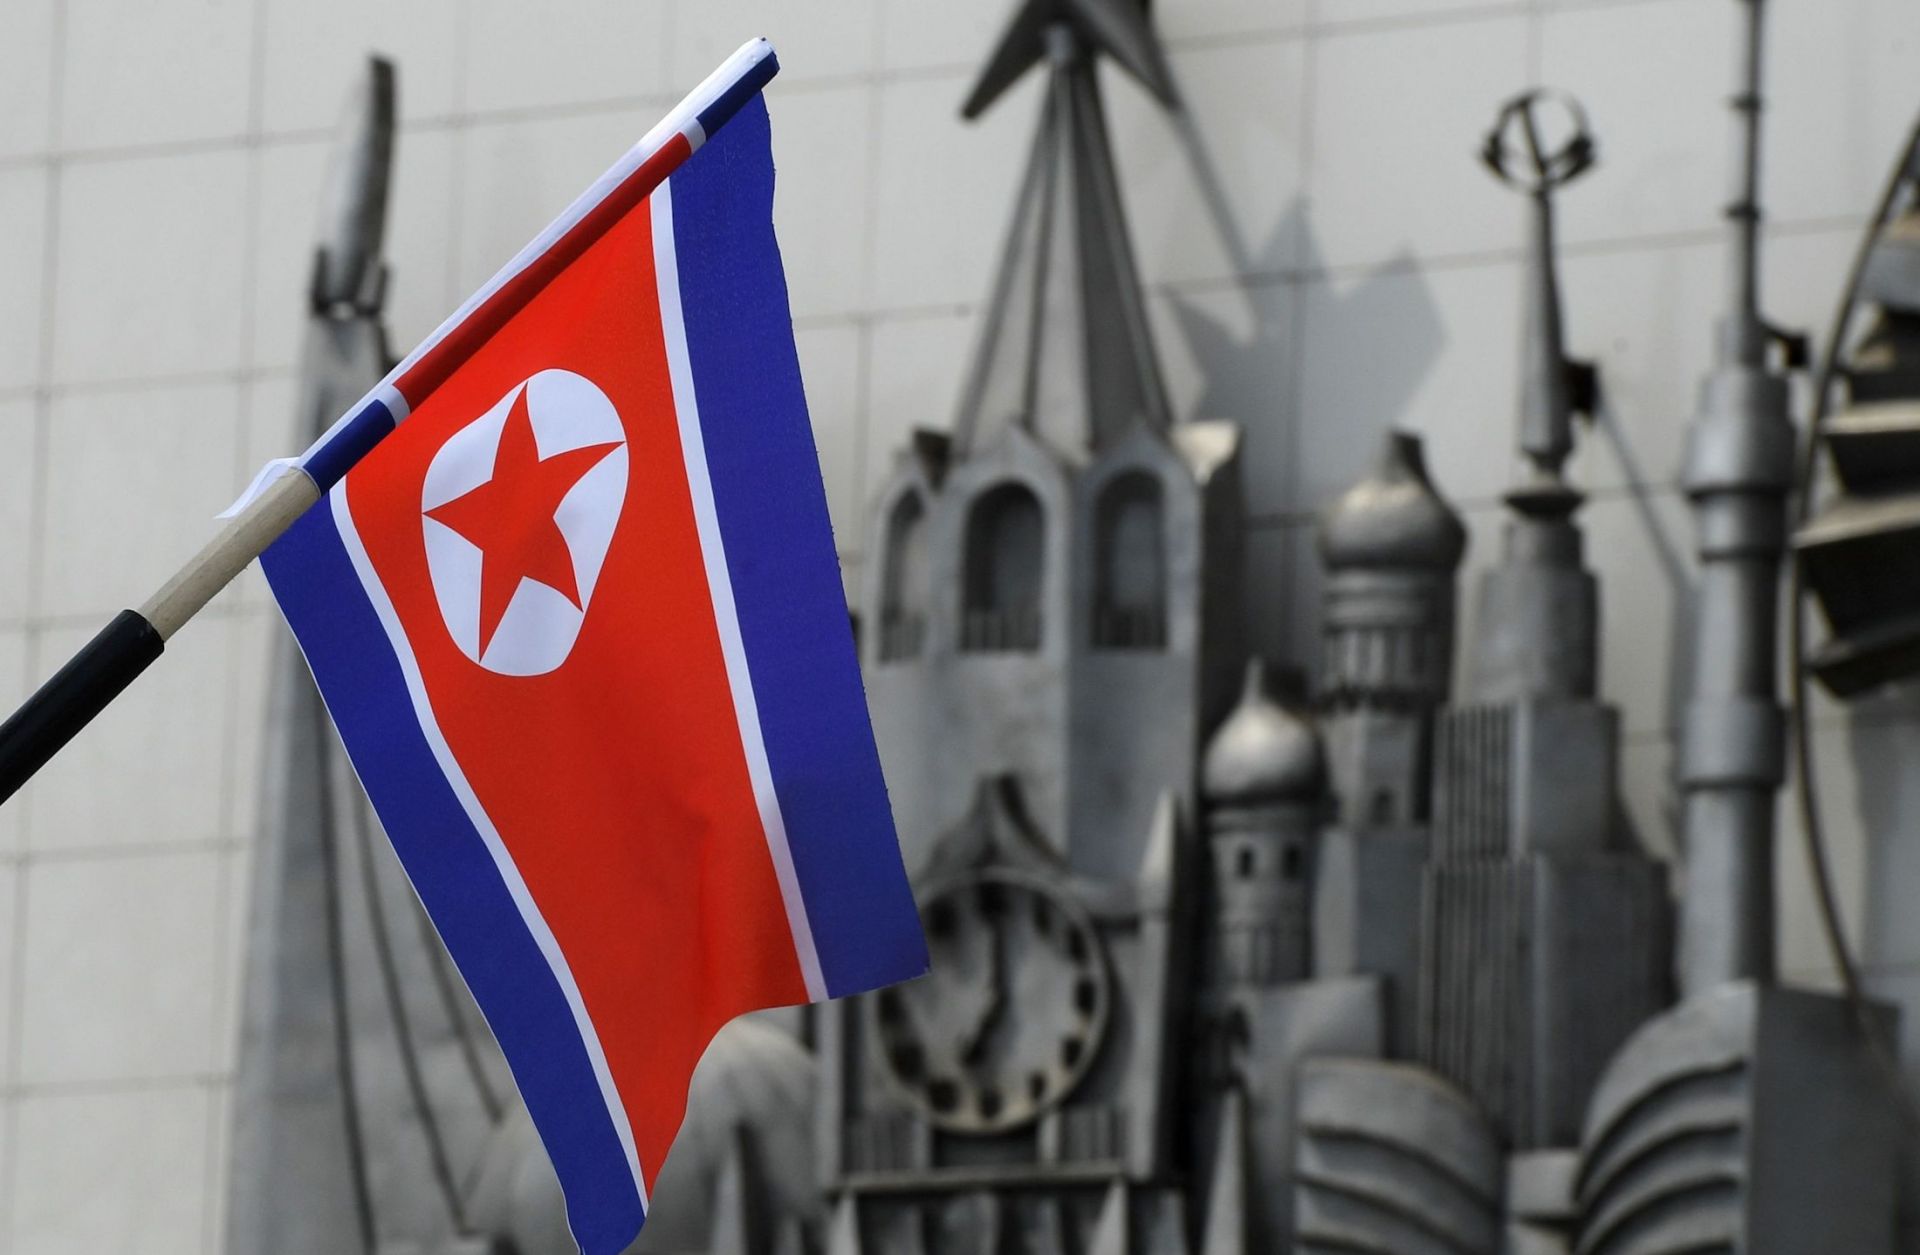 A North Korean flag is seen fixed on a lamp post in the far-eastern Russian port of Vladivostok on April 25, 2019. 